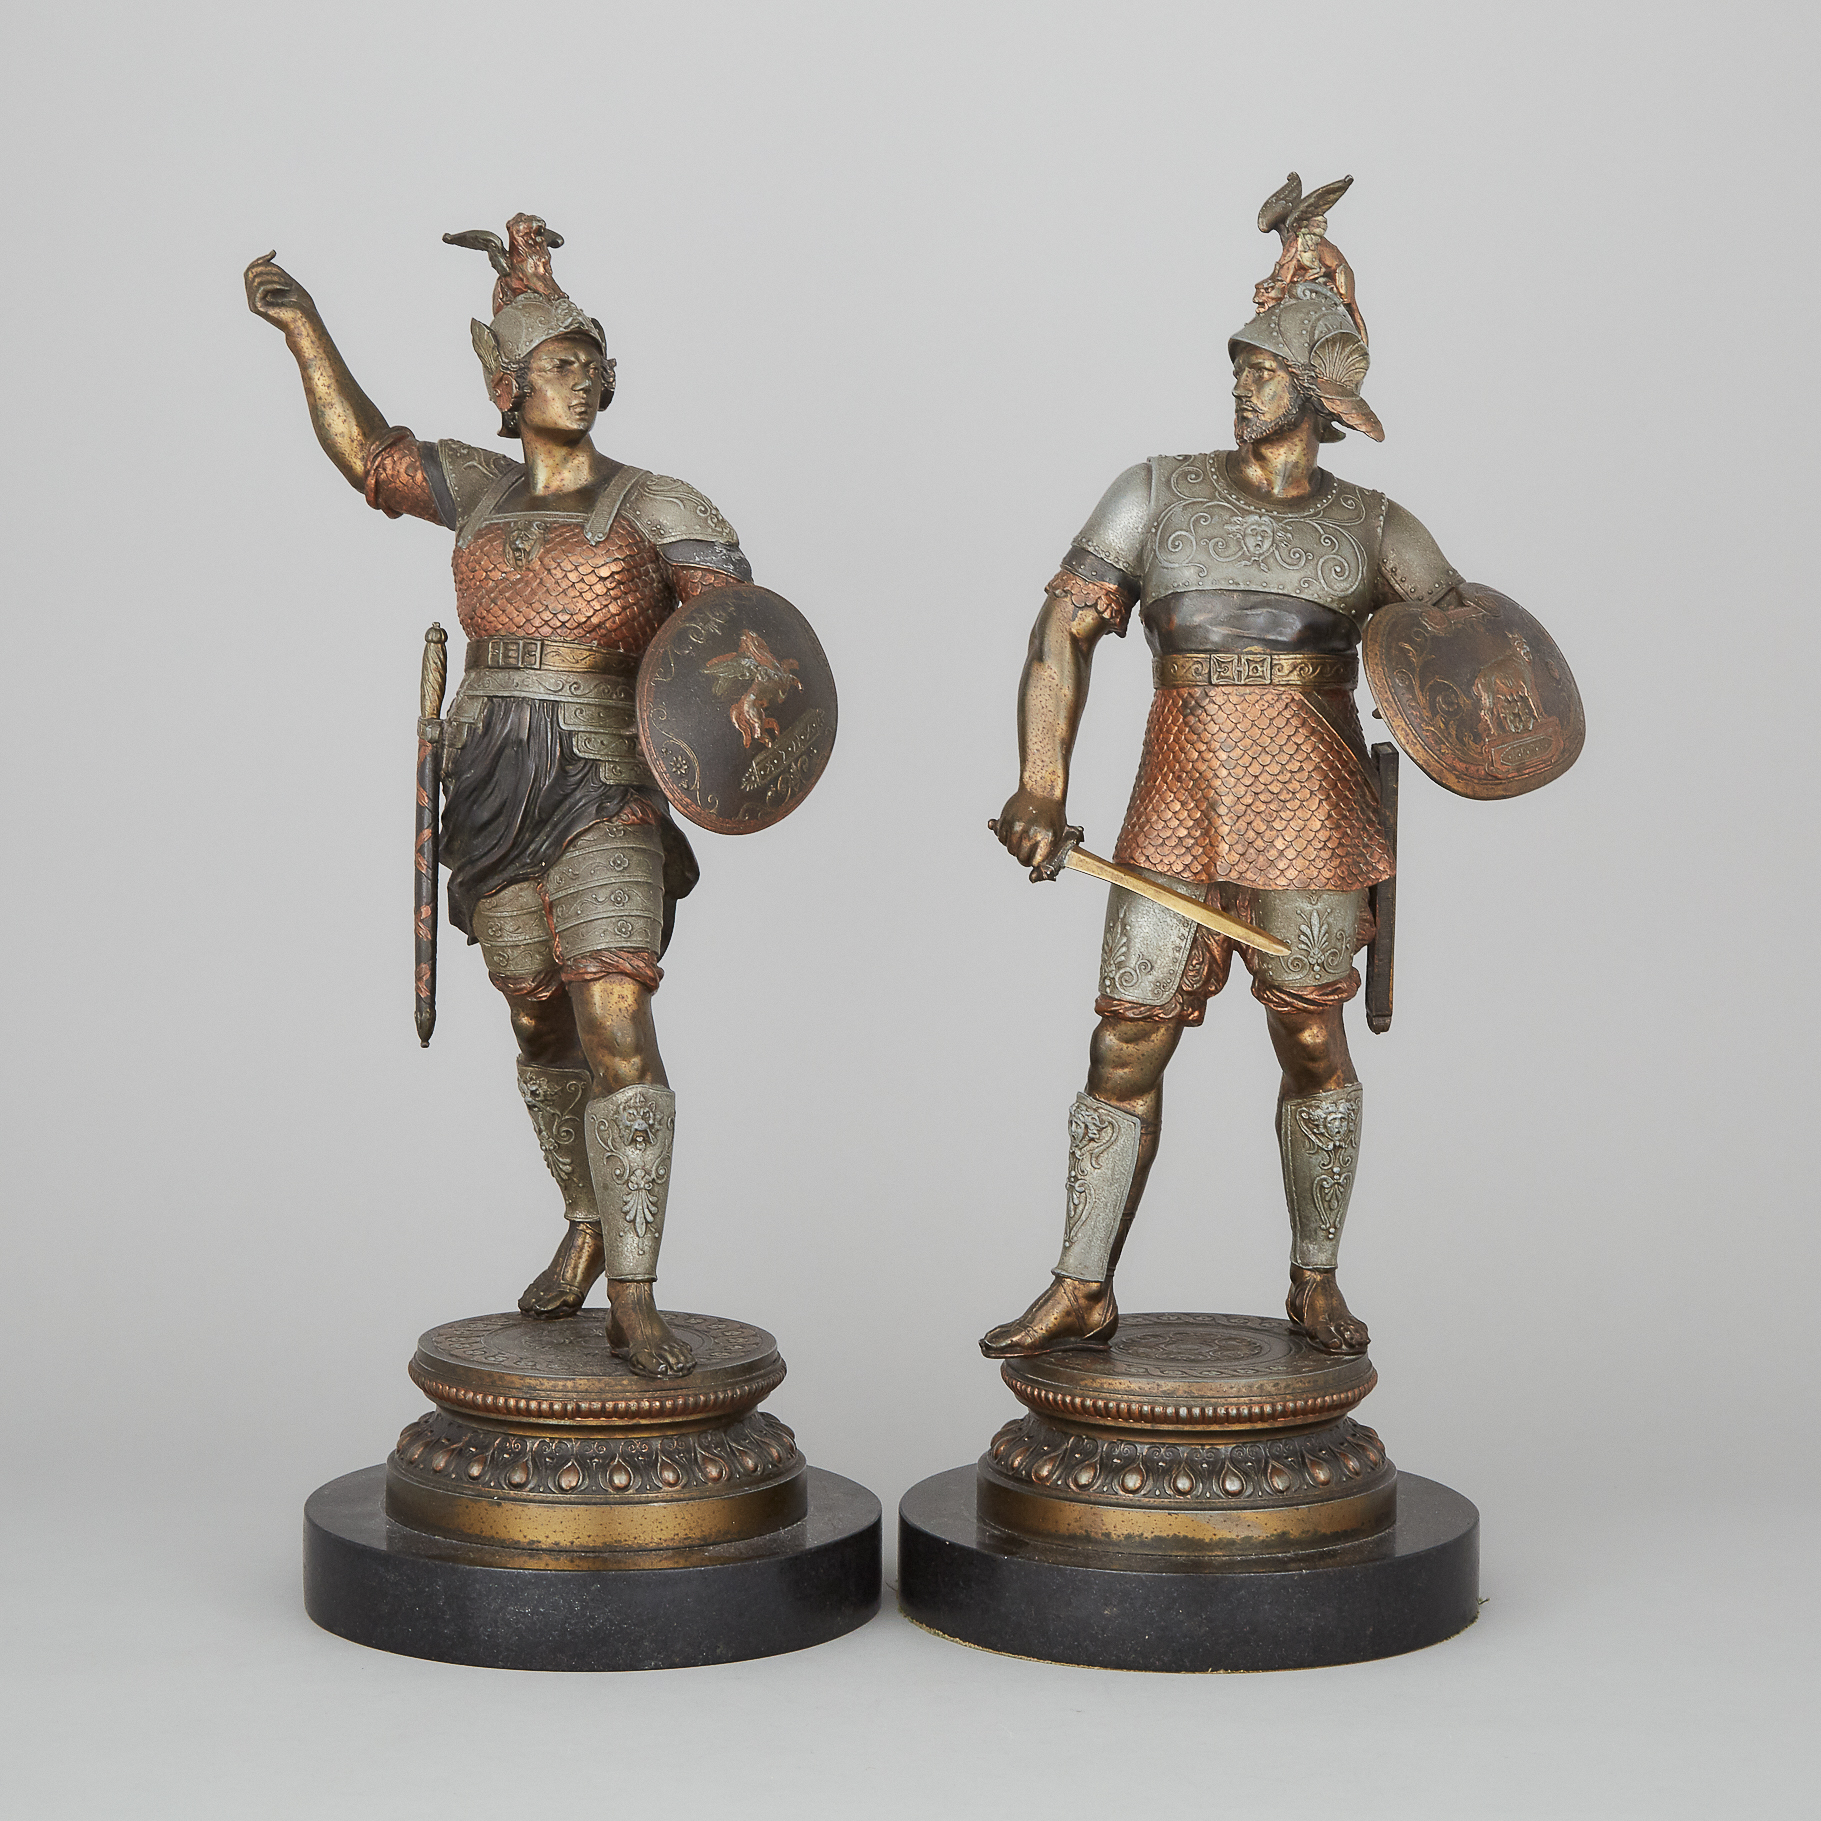 Pair of Victorian Patinated White Metal FIgures of Roman Soldiers, late 19th century